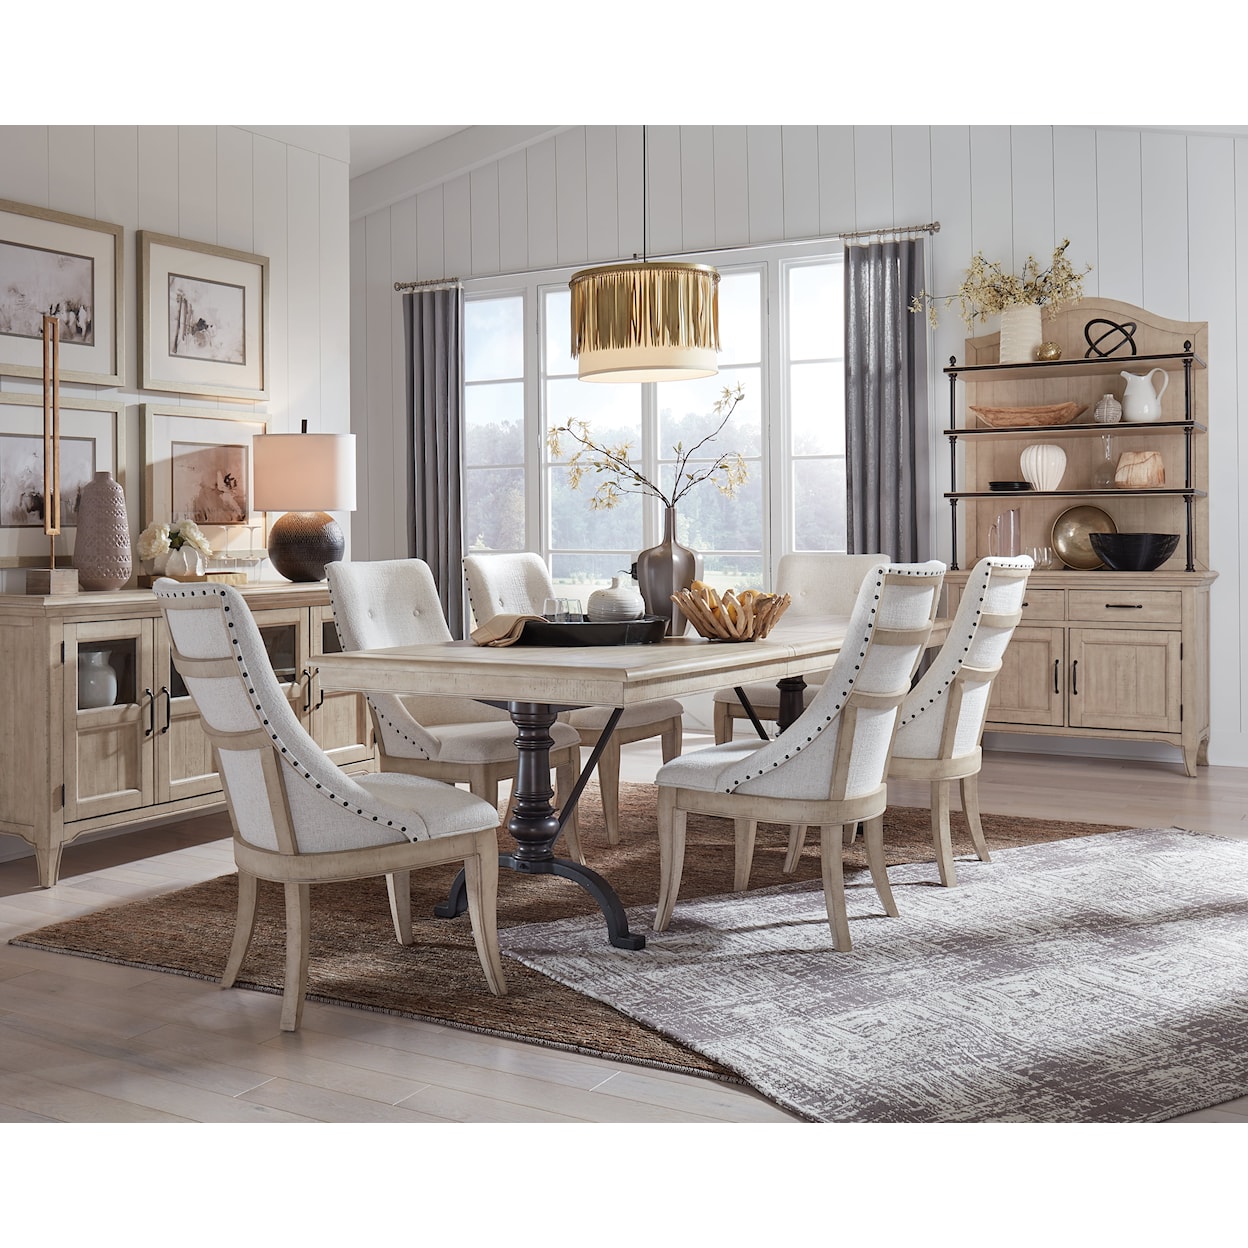 Magnussen Home Harlow Dining 7-Piece Dining Room Set